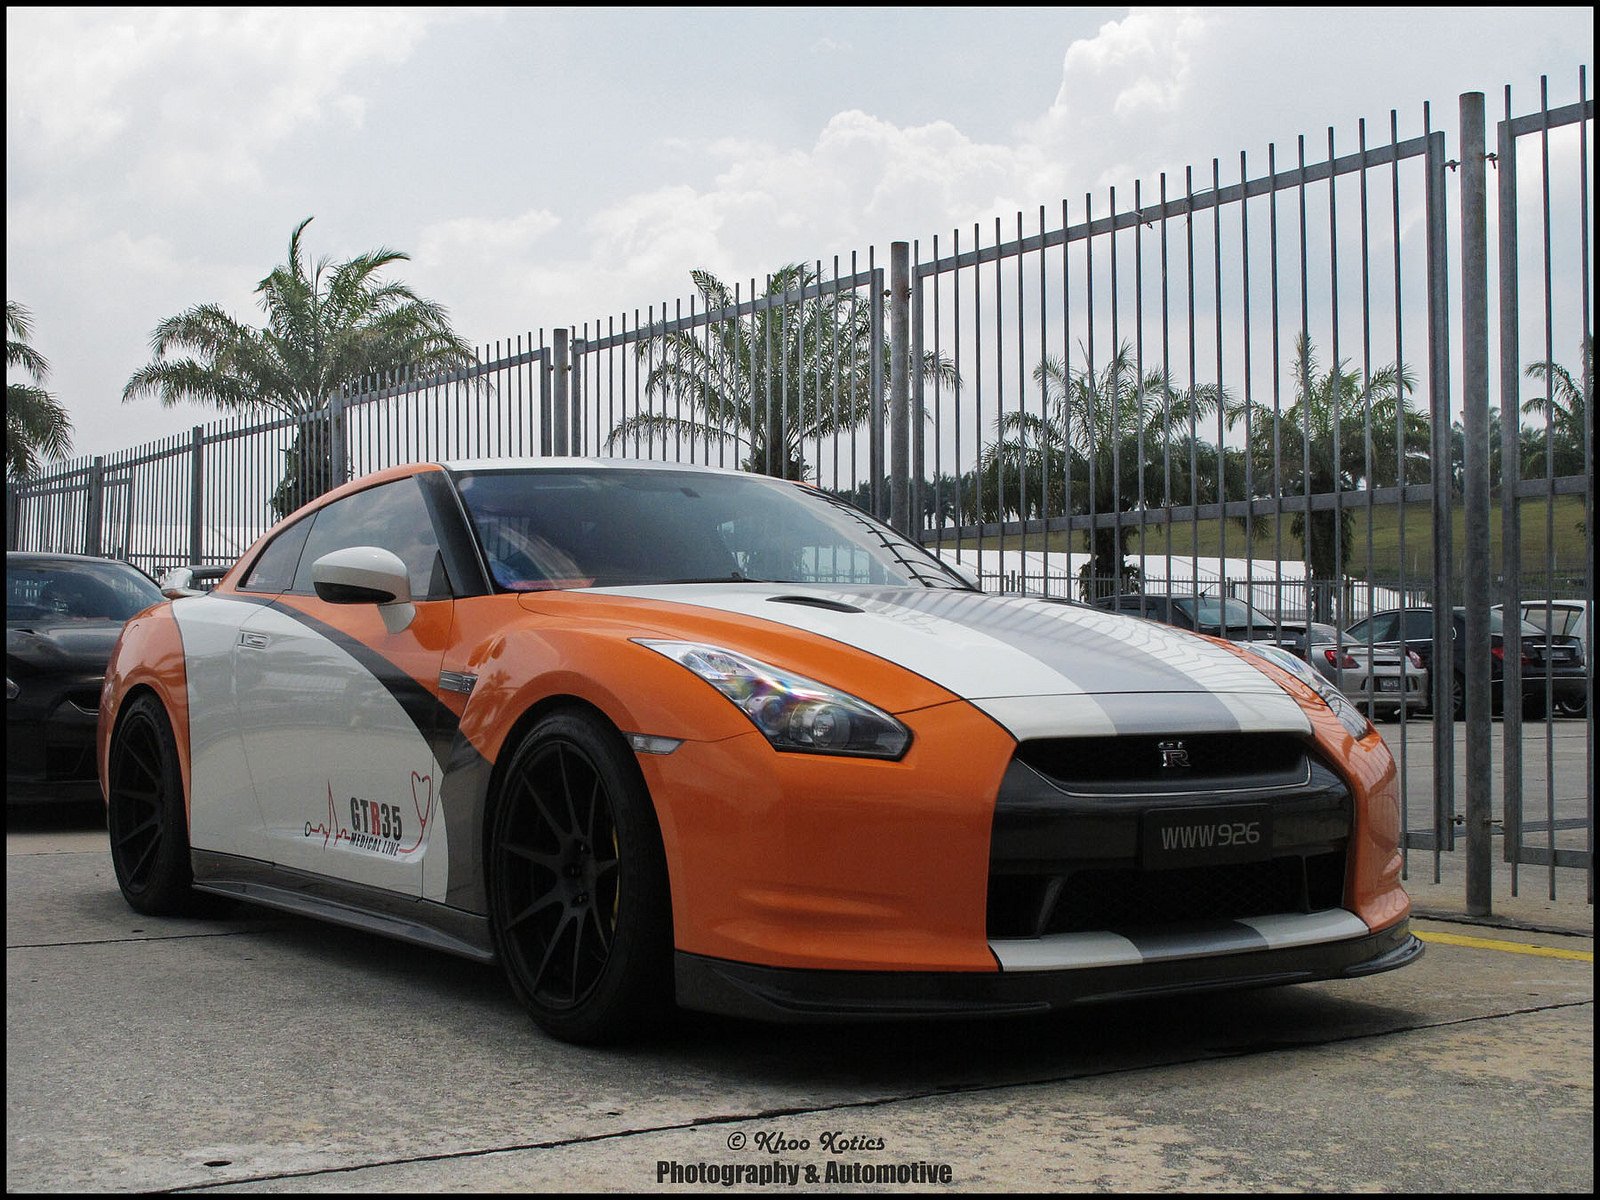 gt r, Nismo, Nissan, R35, Tuning, Supercar, Coupe, Japan, Cars, Orange Wallpaper